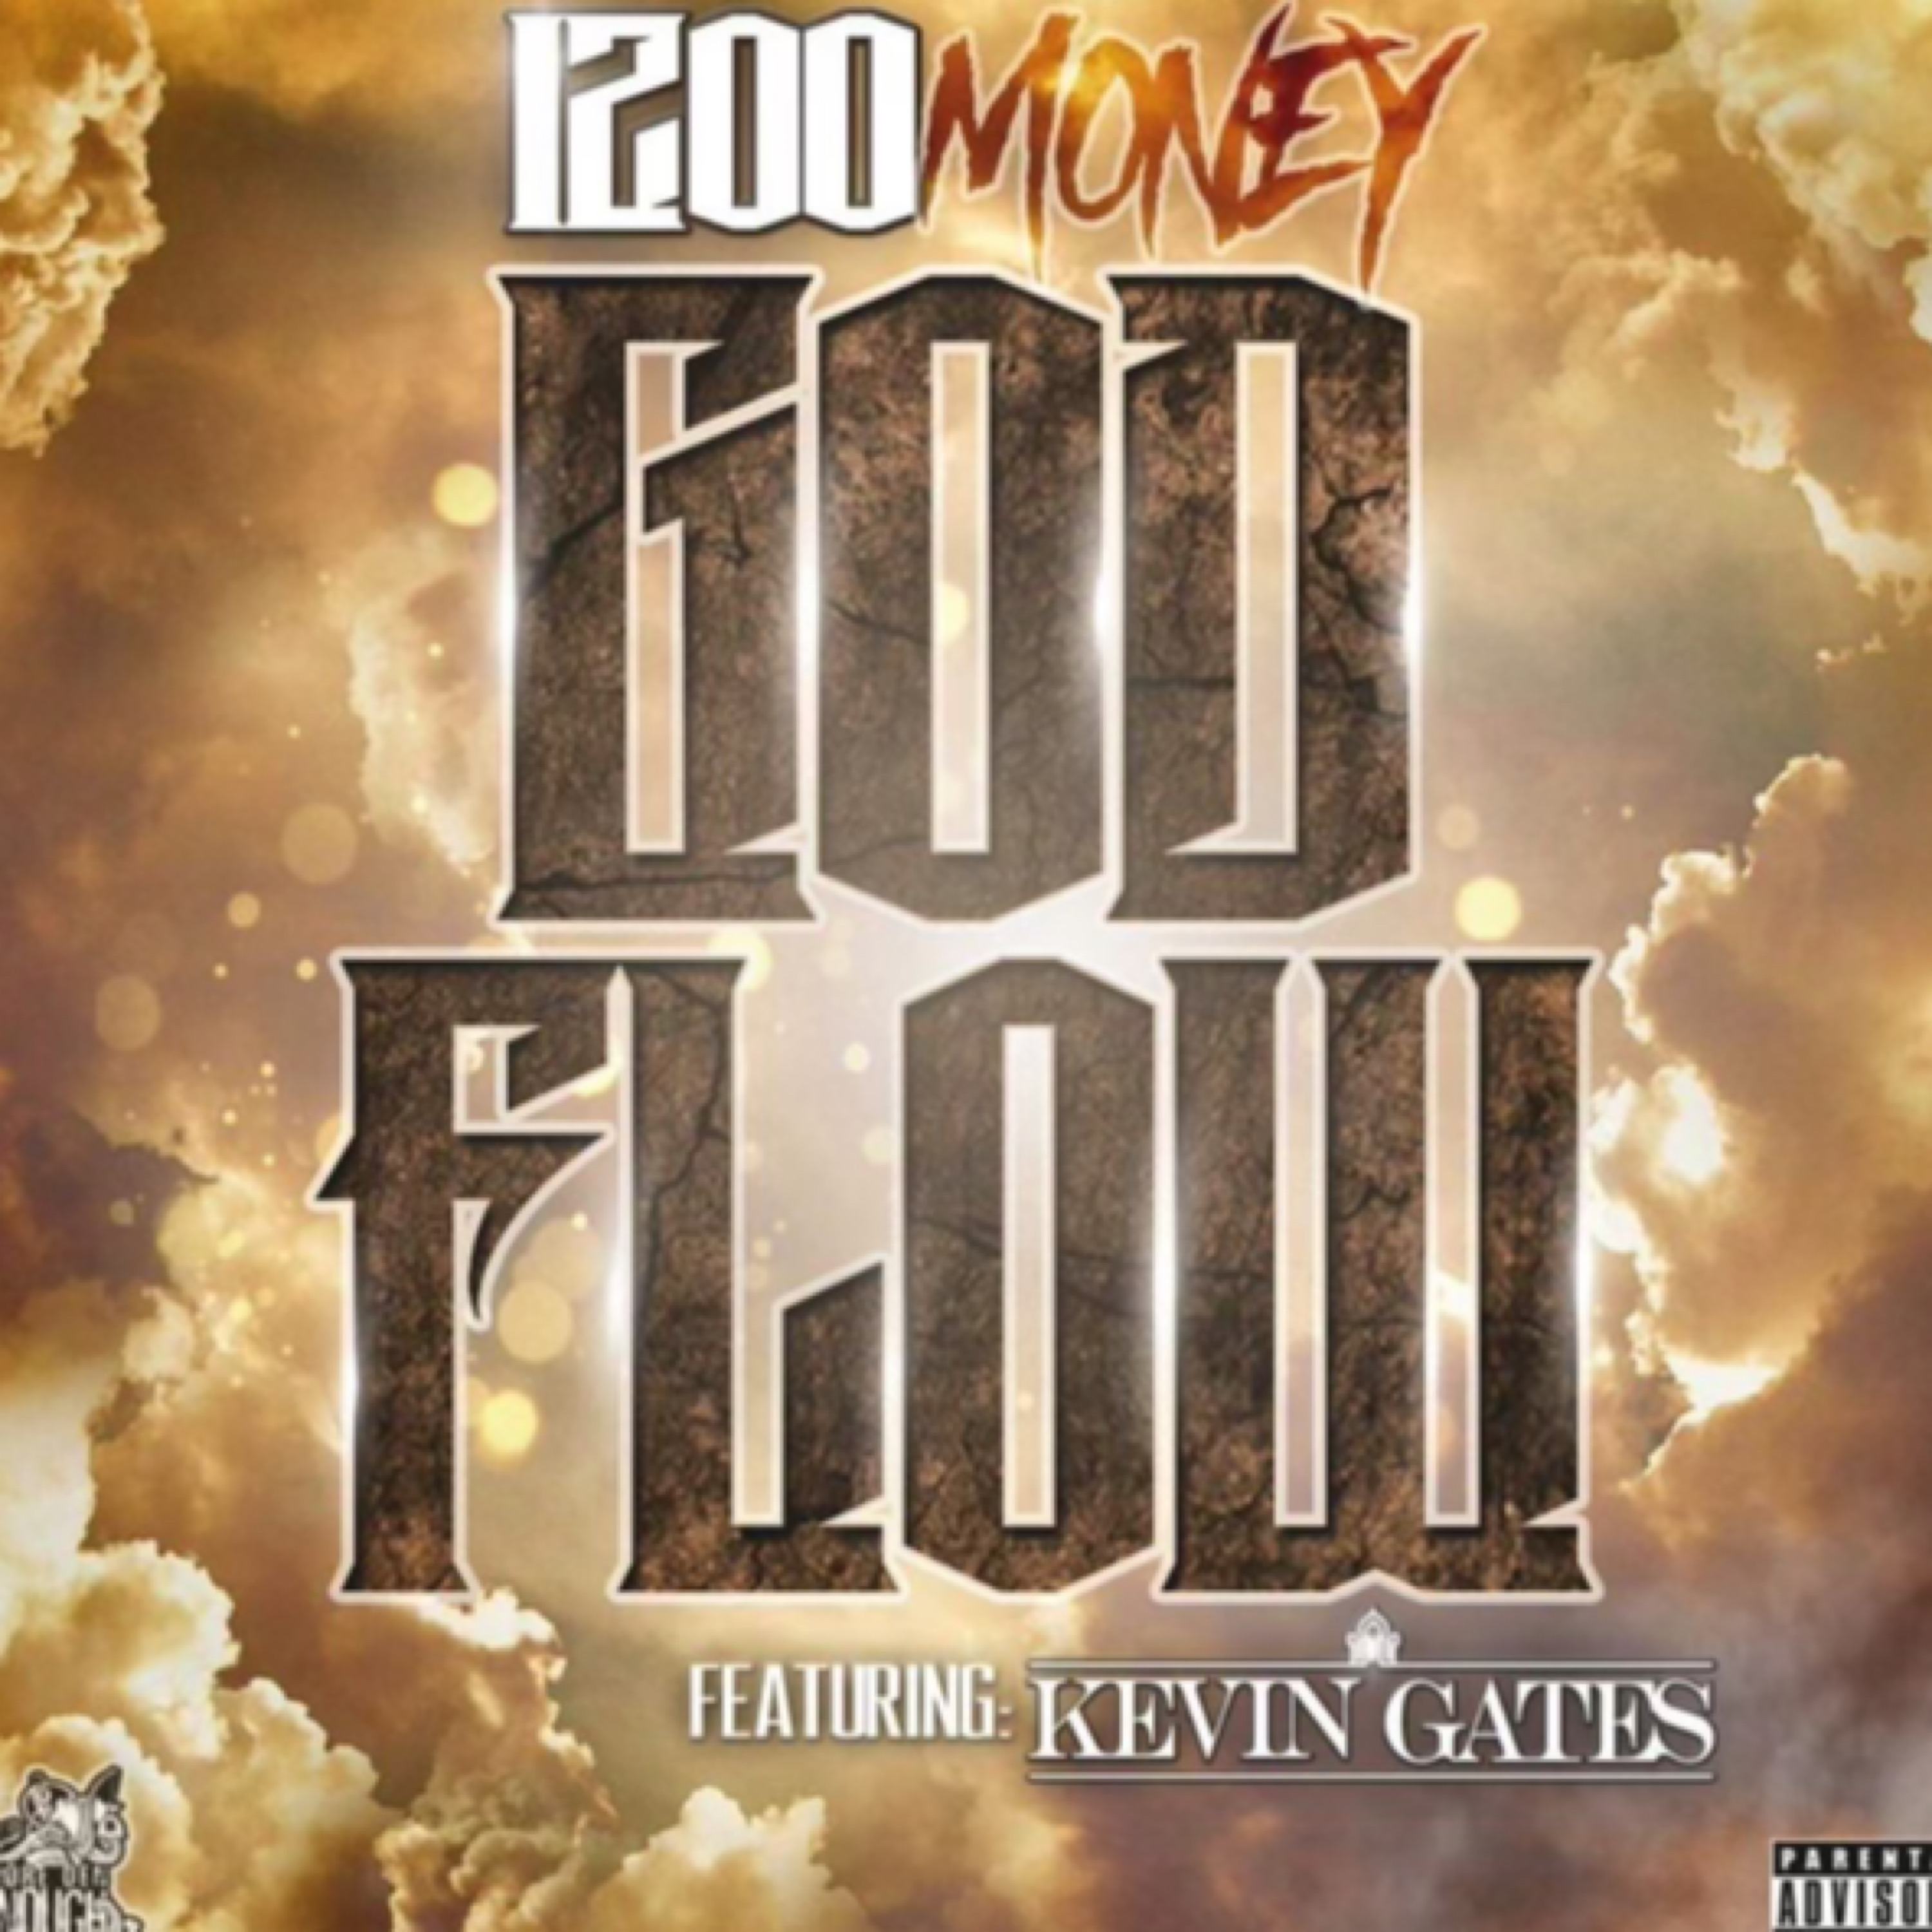 Art for God Flow featuring Kevin Gates by 1200 Money